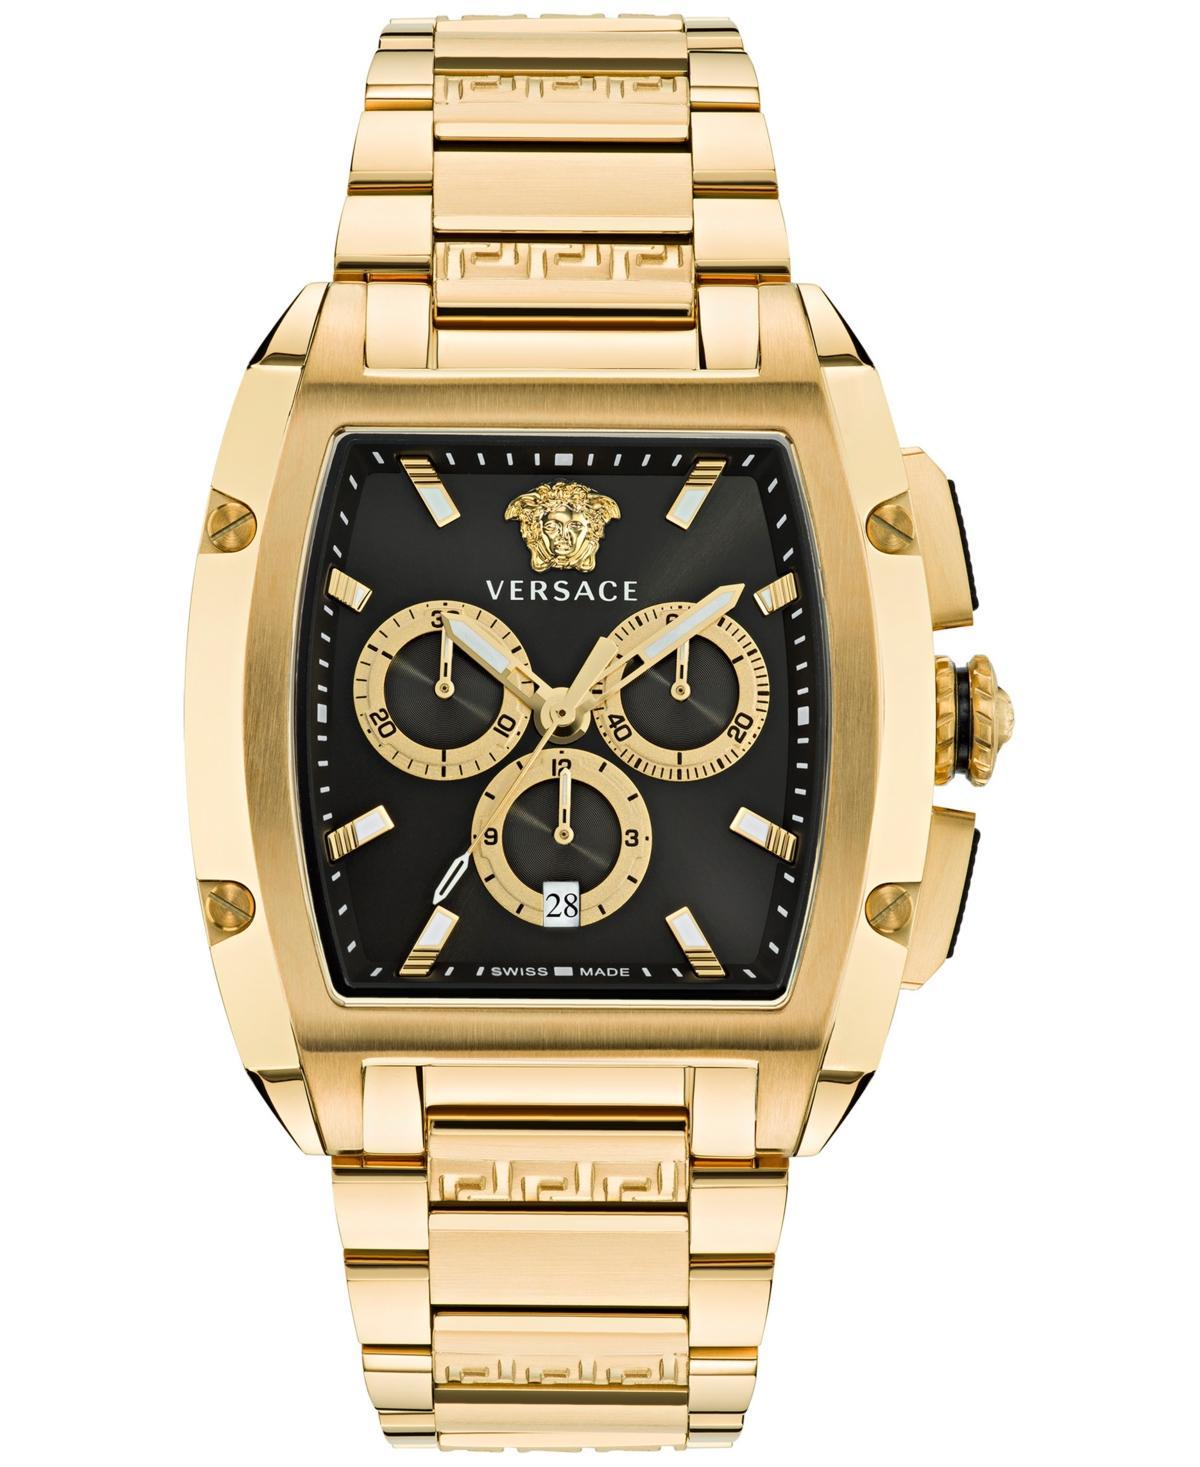 Versace Dominus Chronograph Silicone Strap Watch, 42mm Product Image